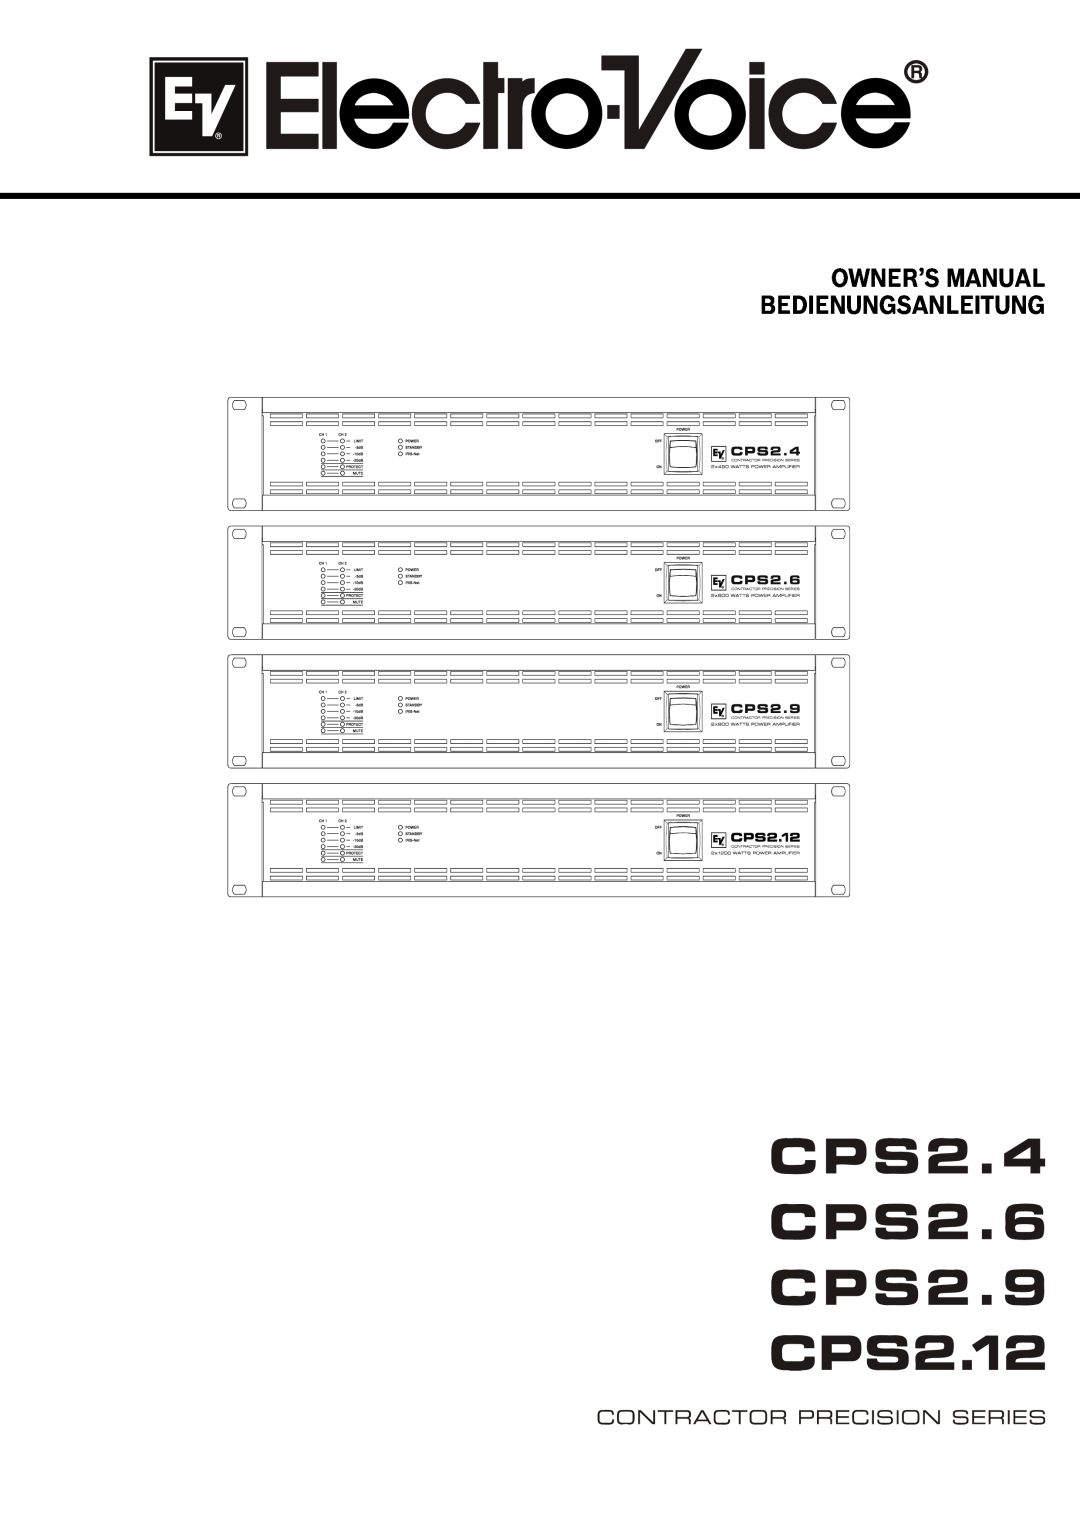 Electro-Voice CPS2.12, CPS2.6, CPS2.4, CPS2.9 owner manual 